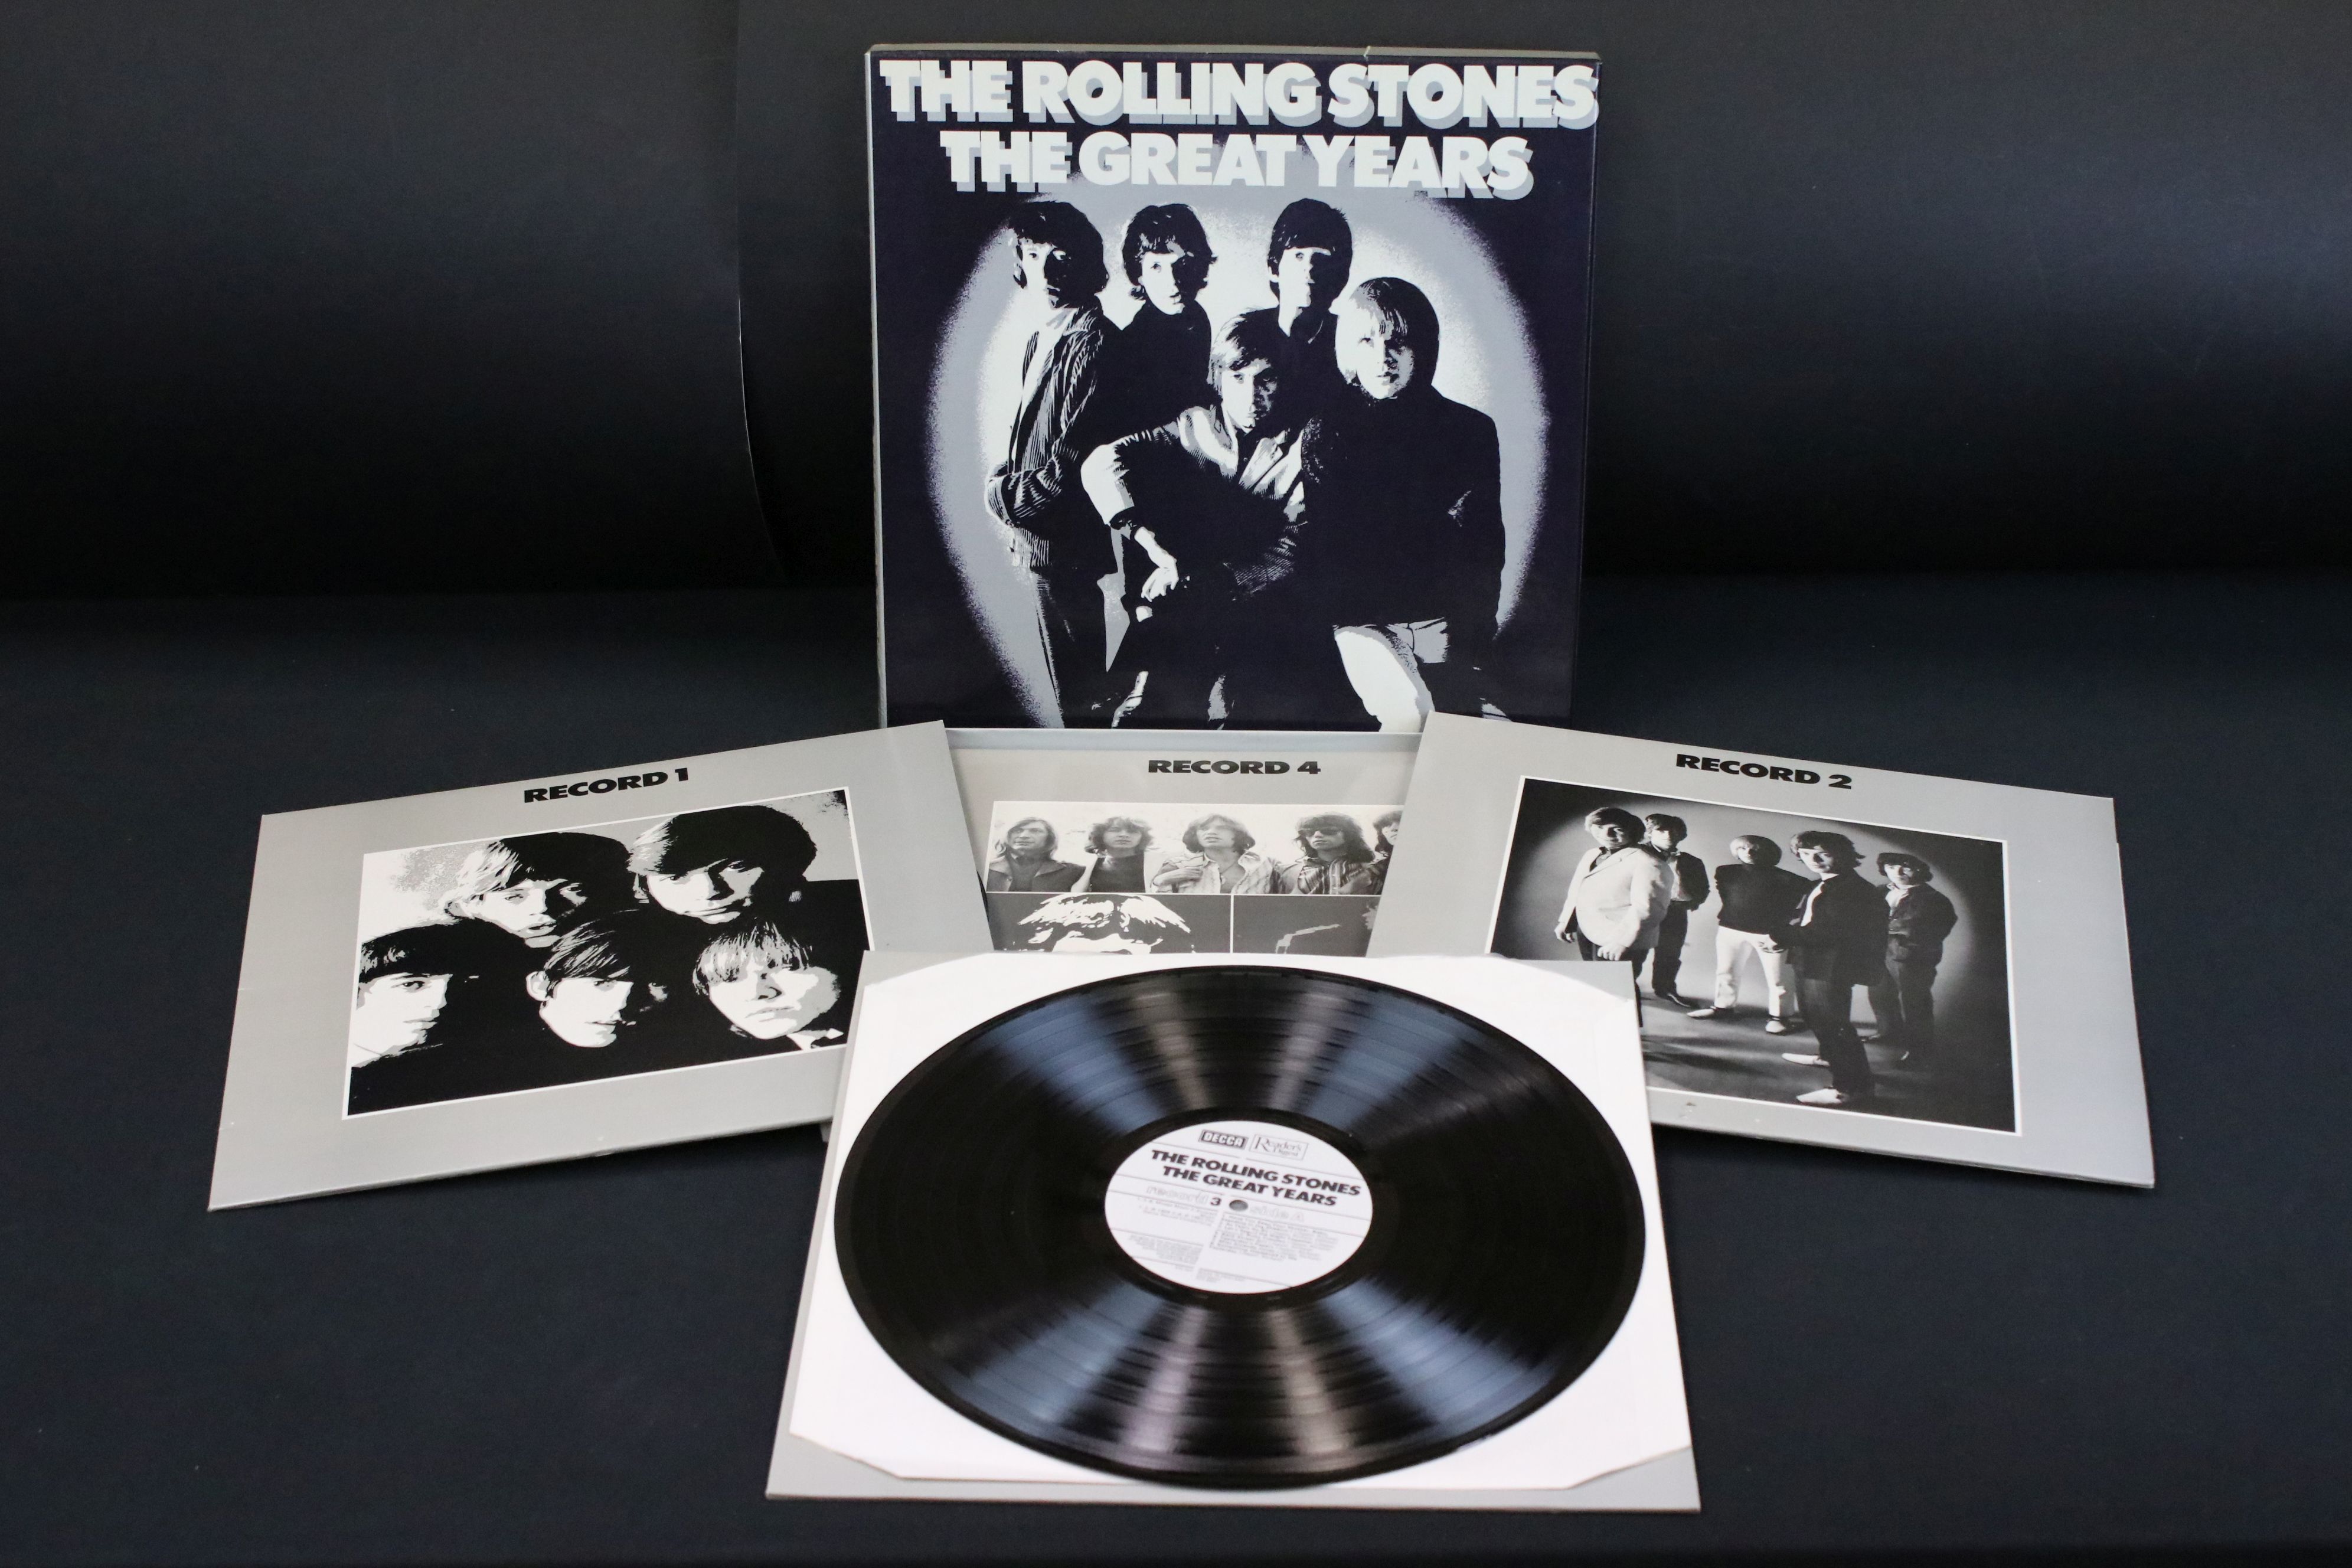 Vinyl - The Rolling Stones The Great Years Box Set on Readers Digest / Decca 4 LP Box Set, box, - Image 2 of 11